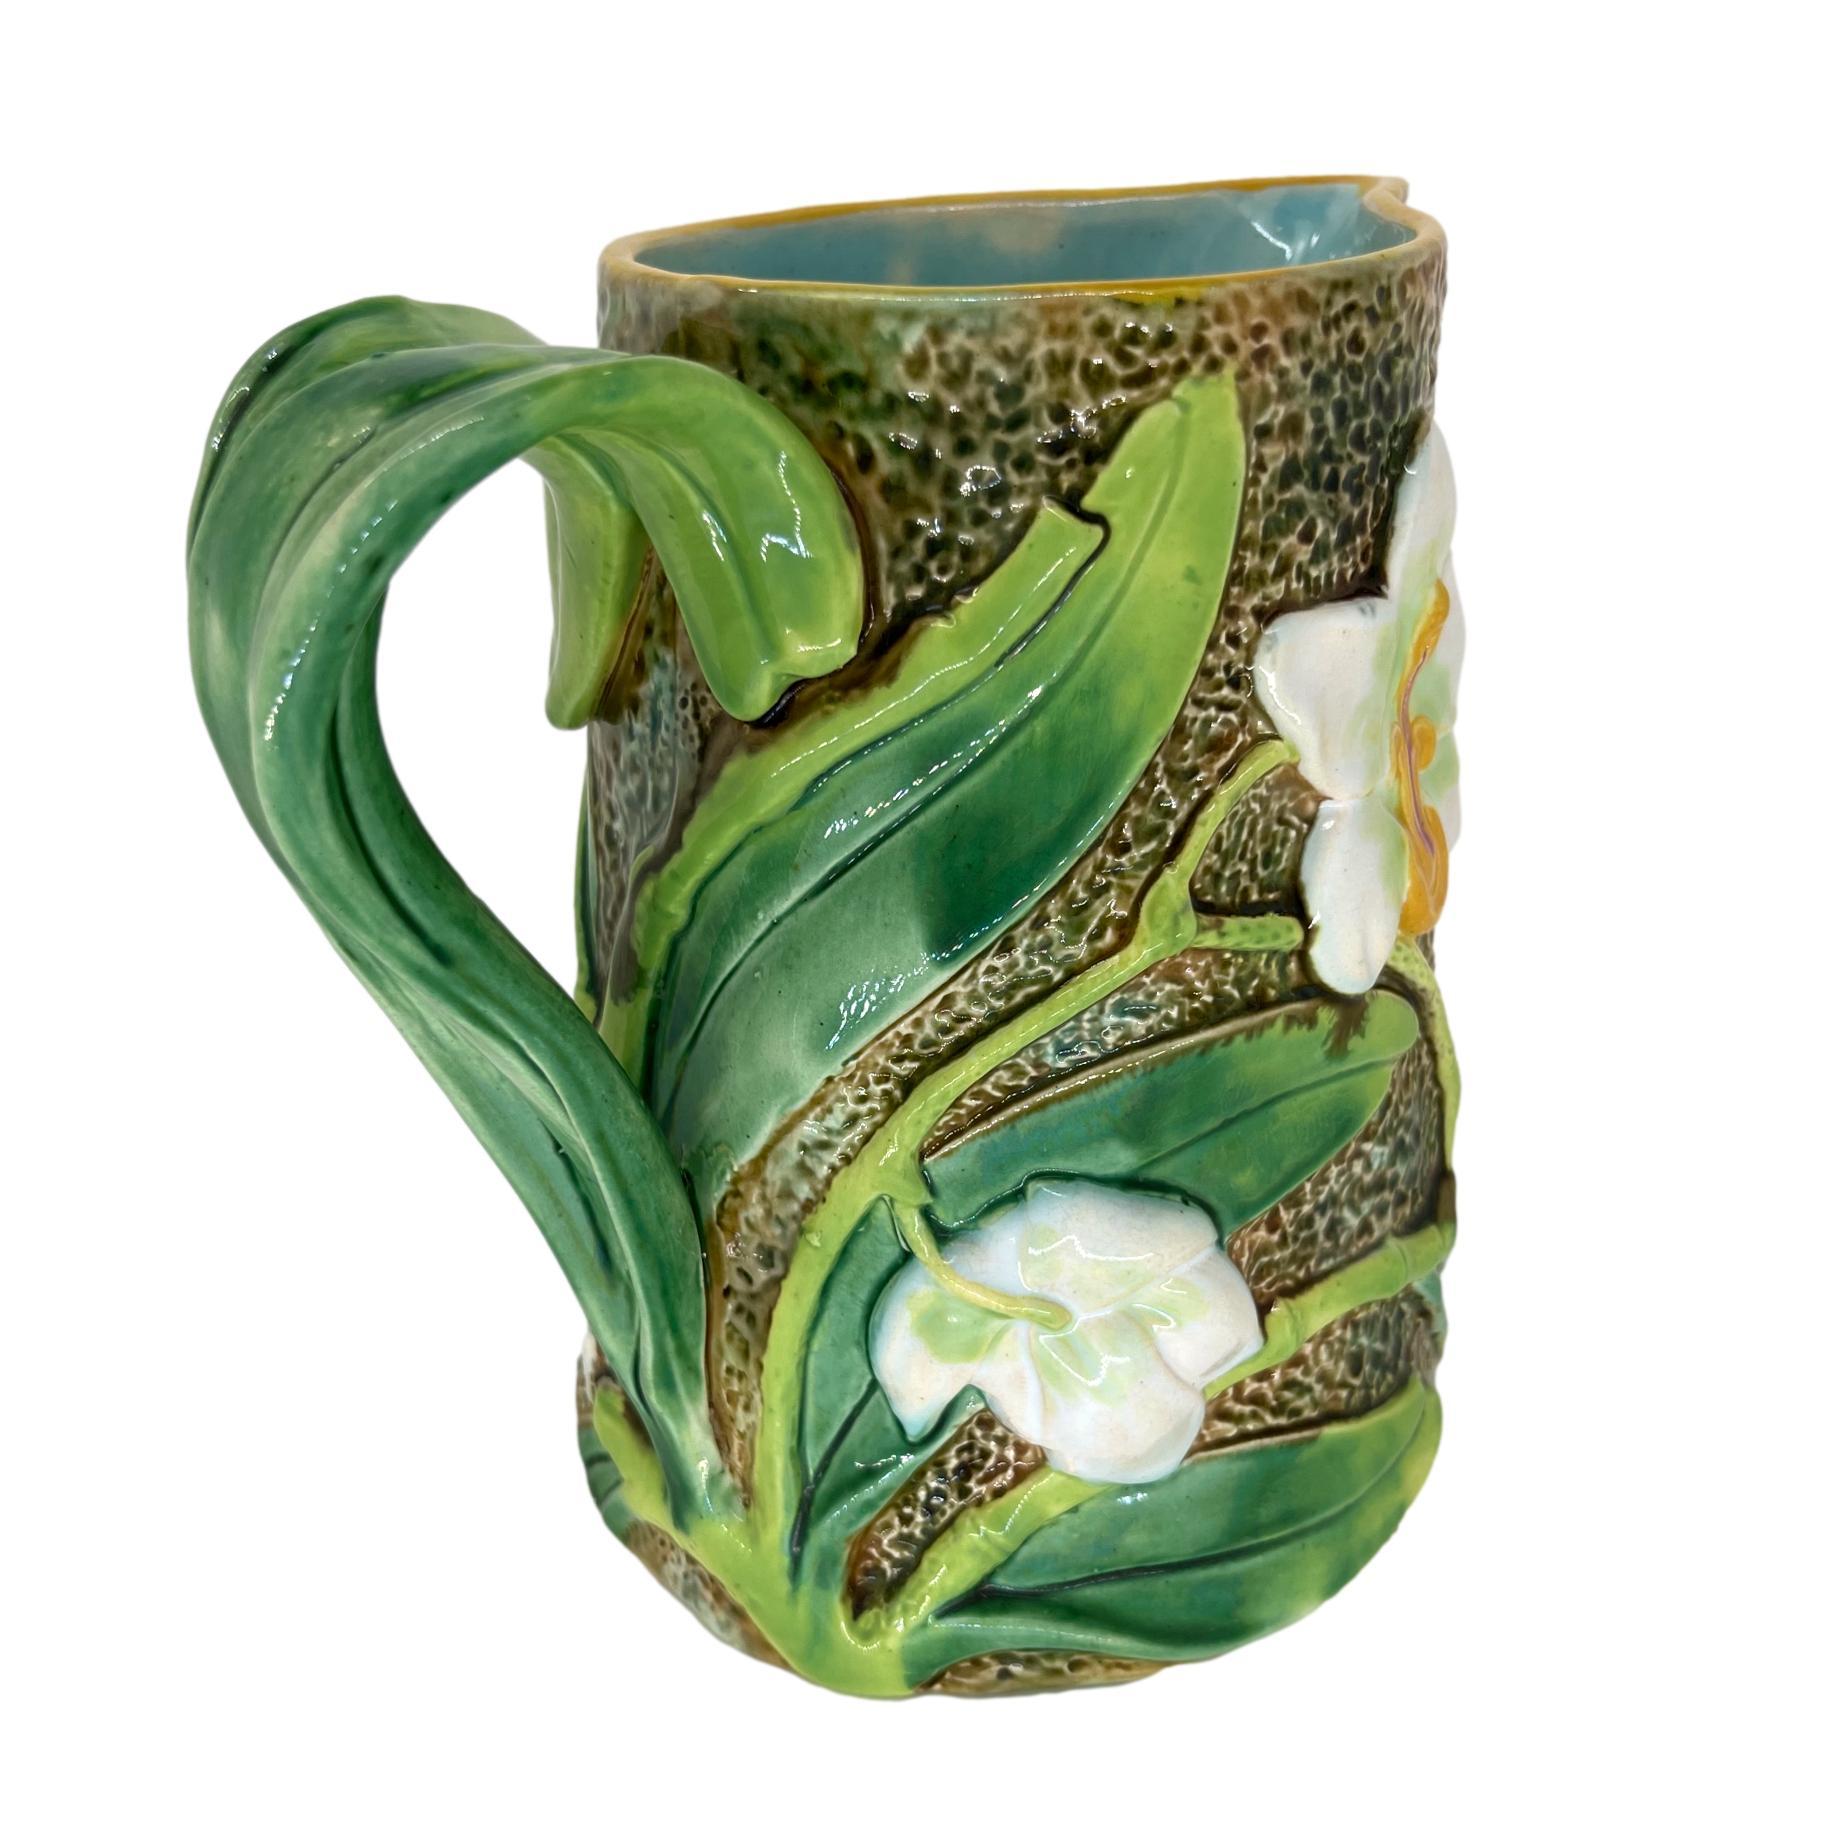 19th Century George Jones Majolica Pitcher with Trompe L'oeil White Orchids, English, c. 1875